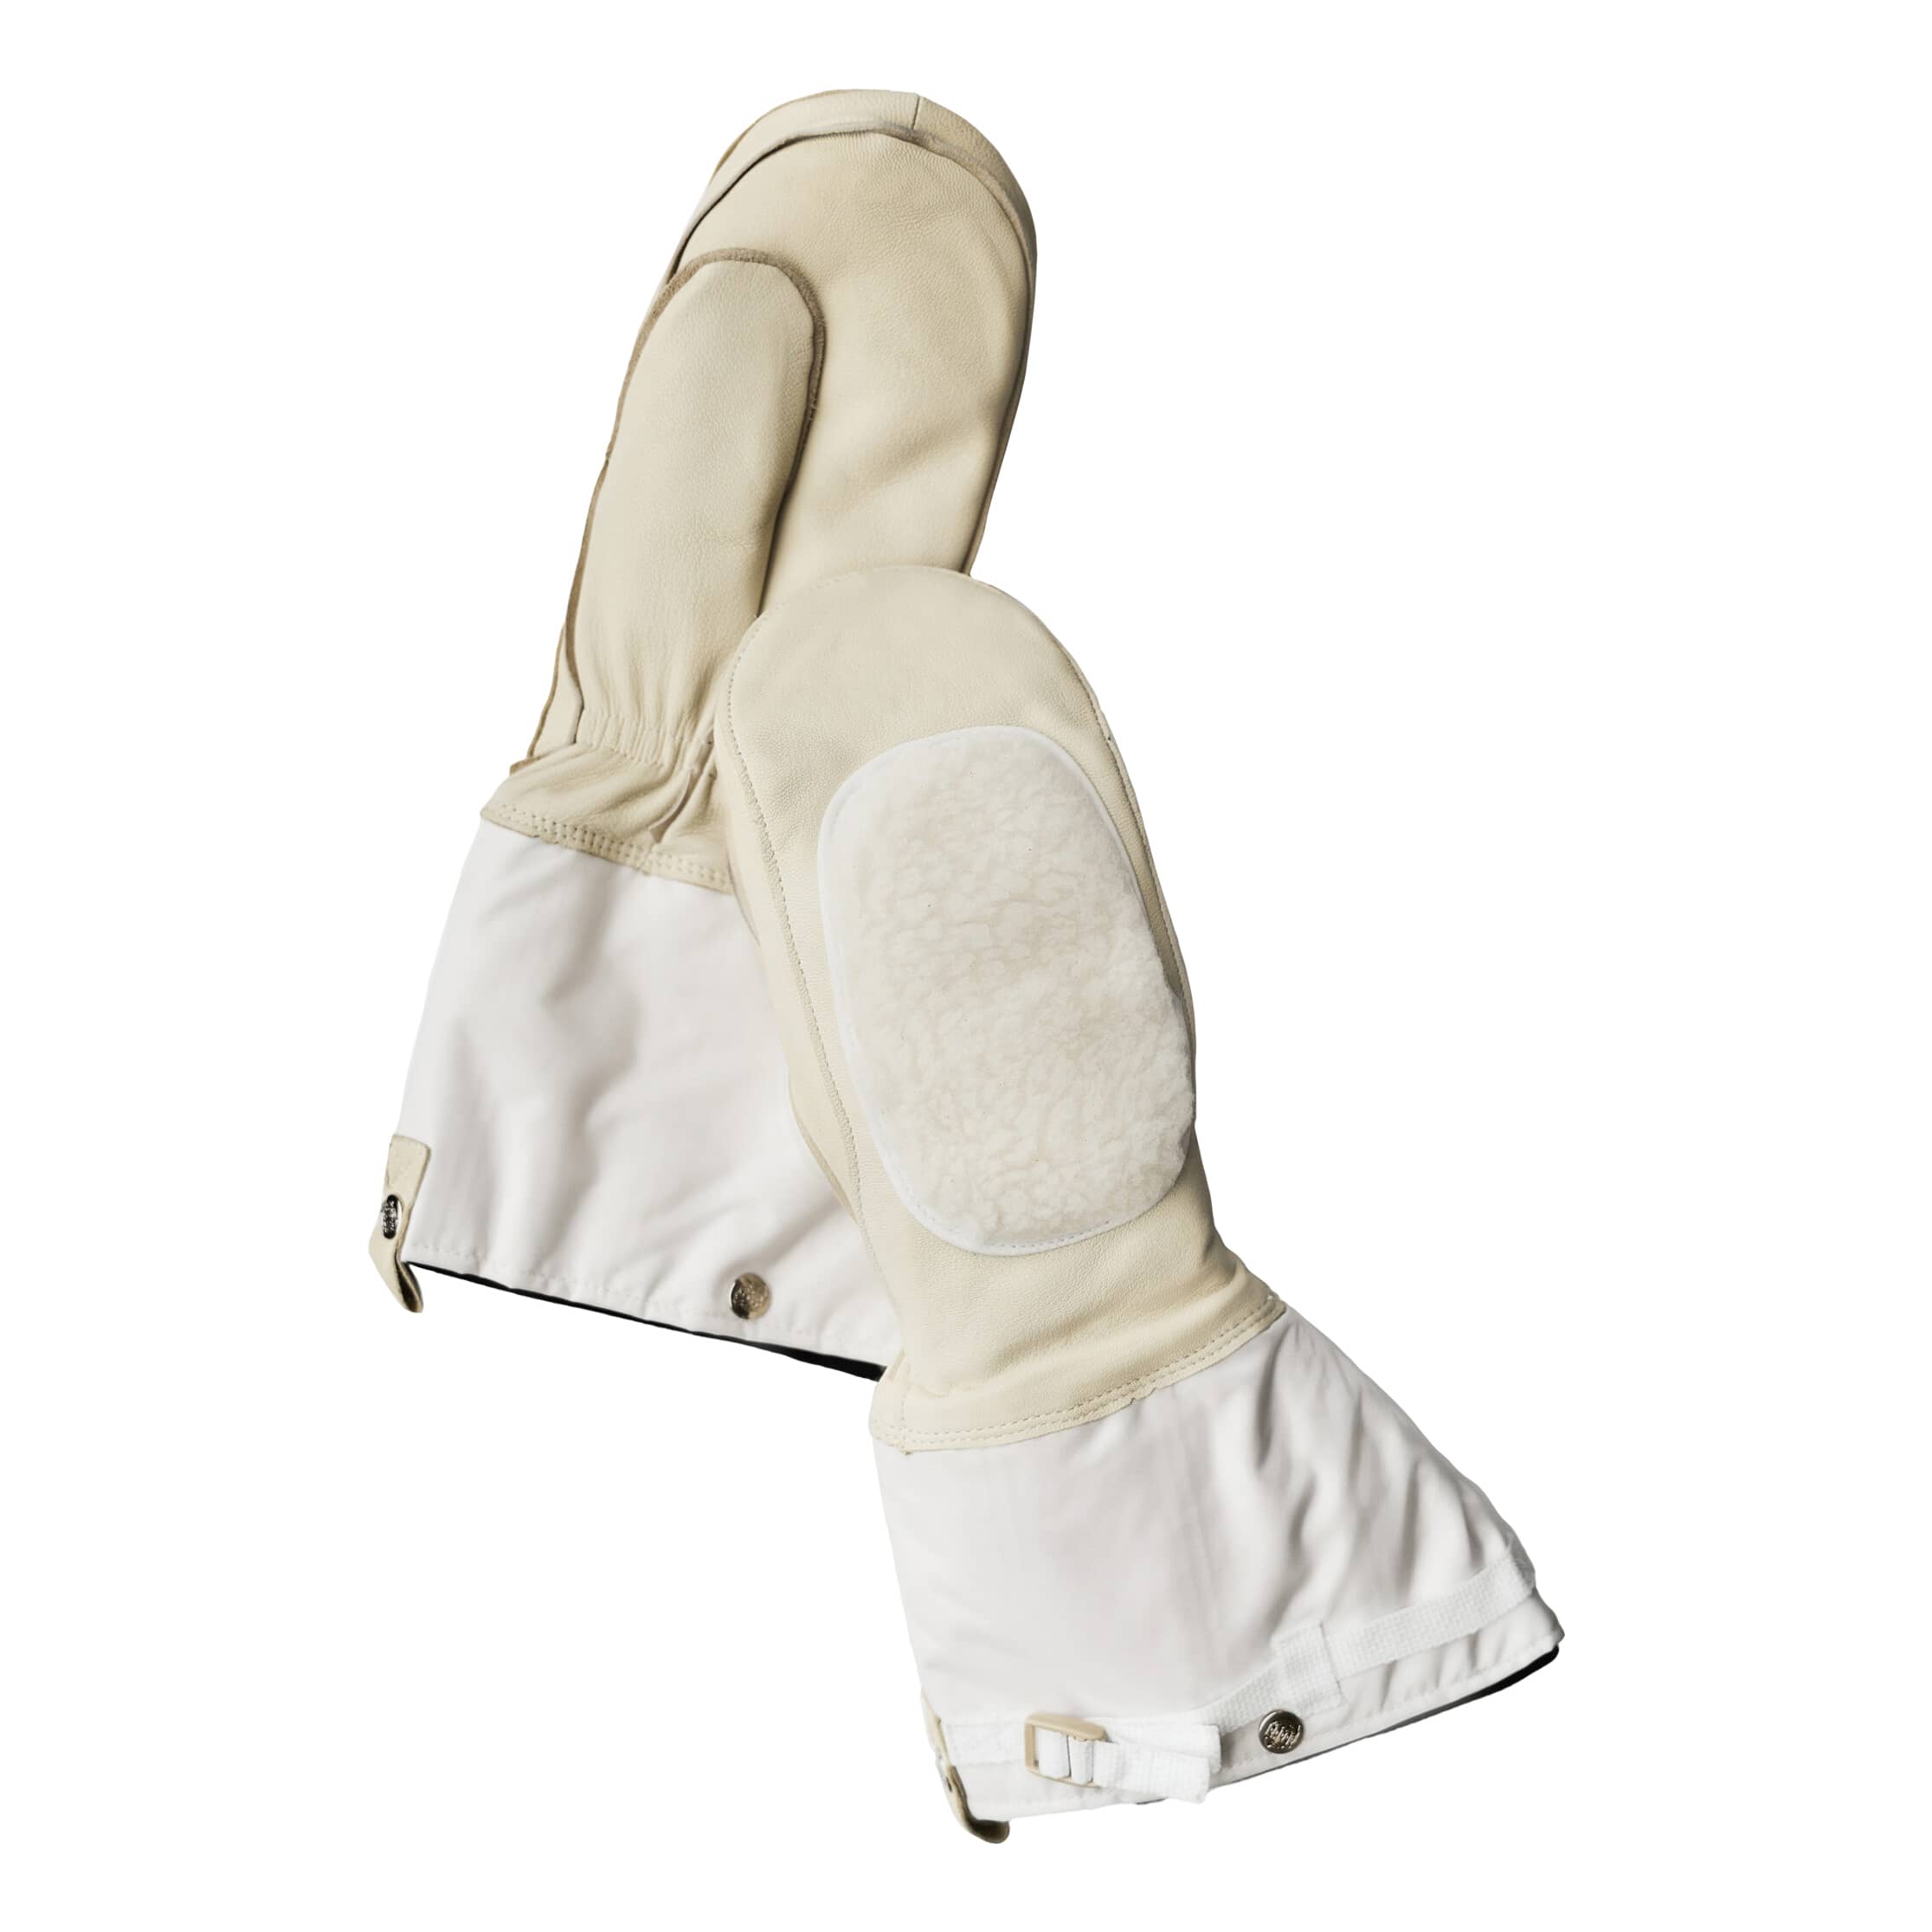 Raber HY-Arctic Extreme Gauntlet Mitt - Military Issue for Arctic Use - Cream